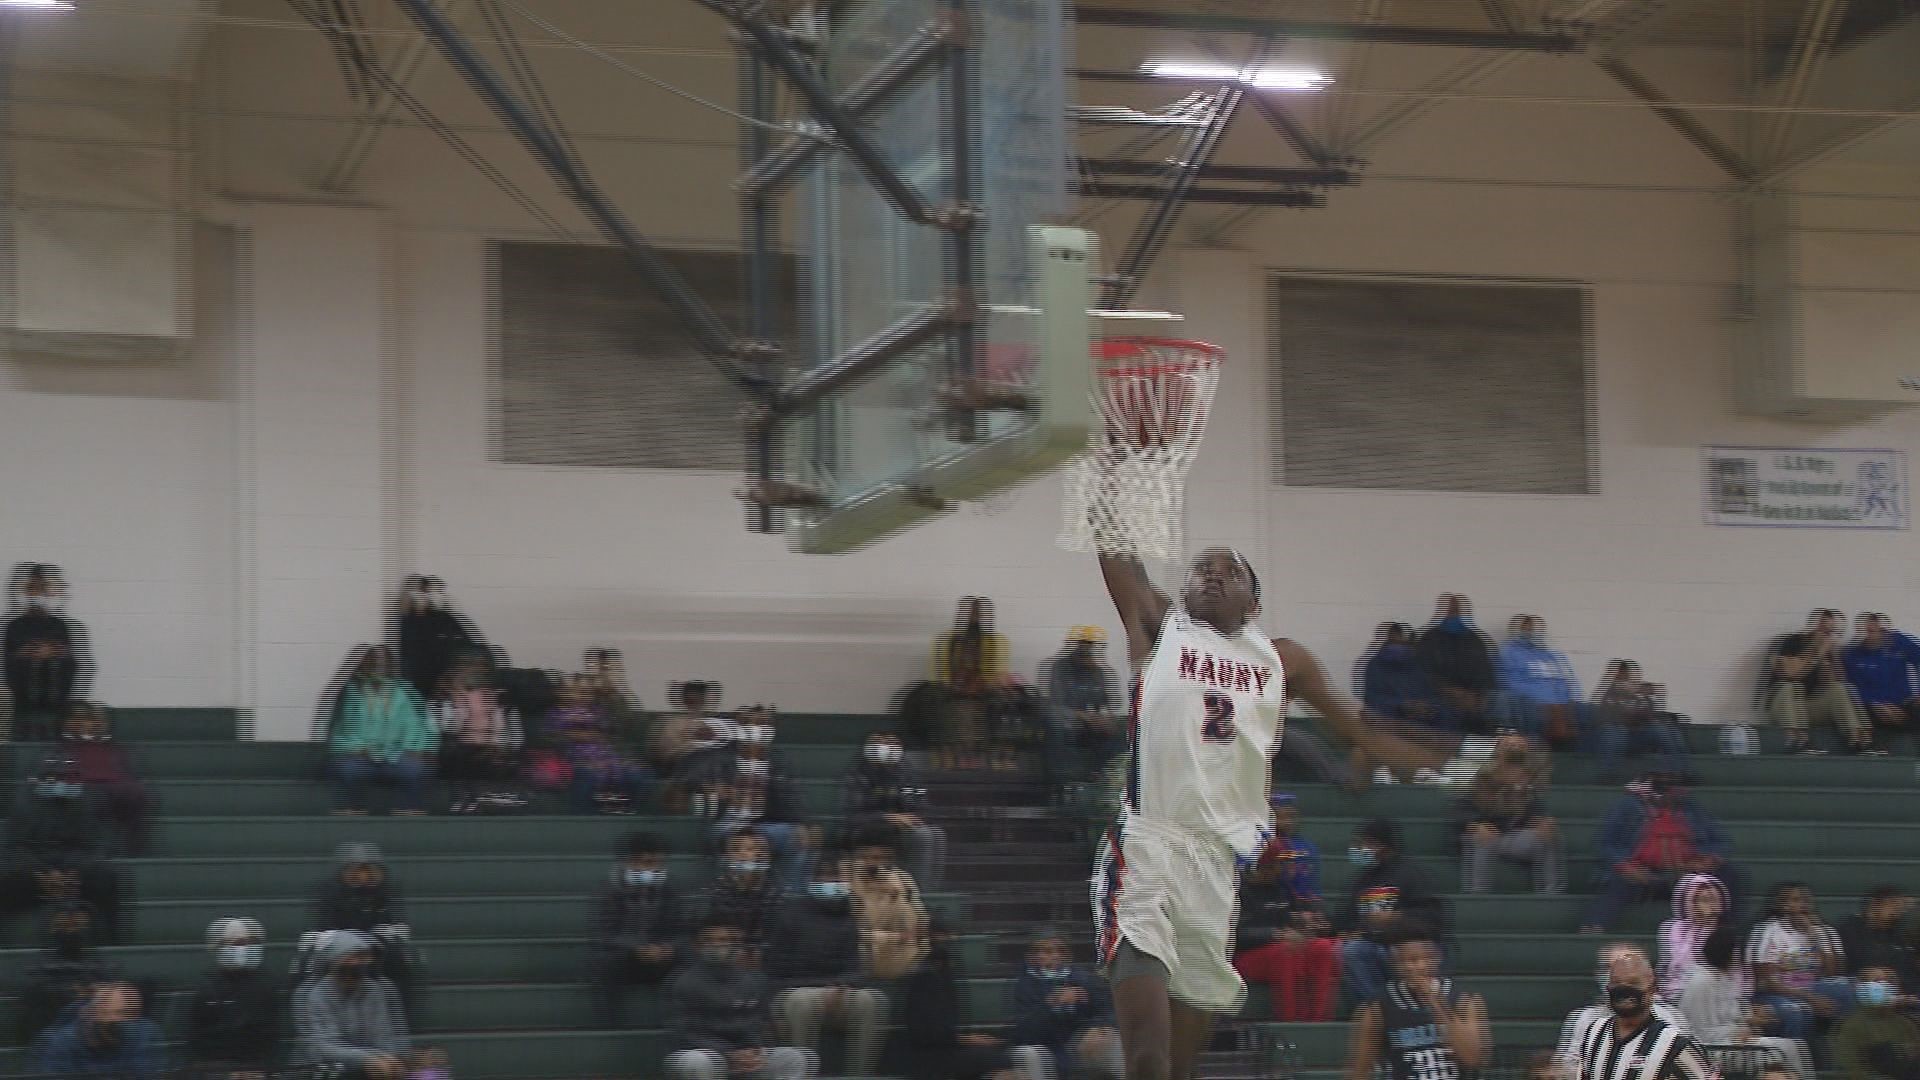 Maury remained perfect (11-0) as they held off The Miller School on Saturday 54-50.